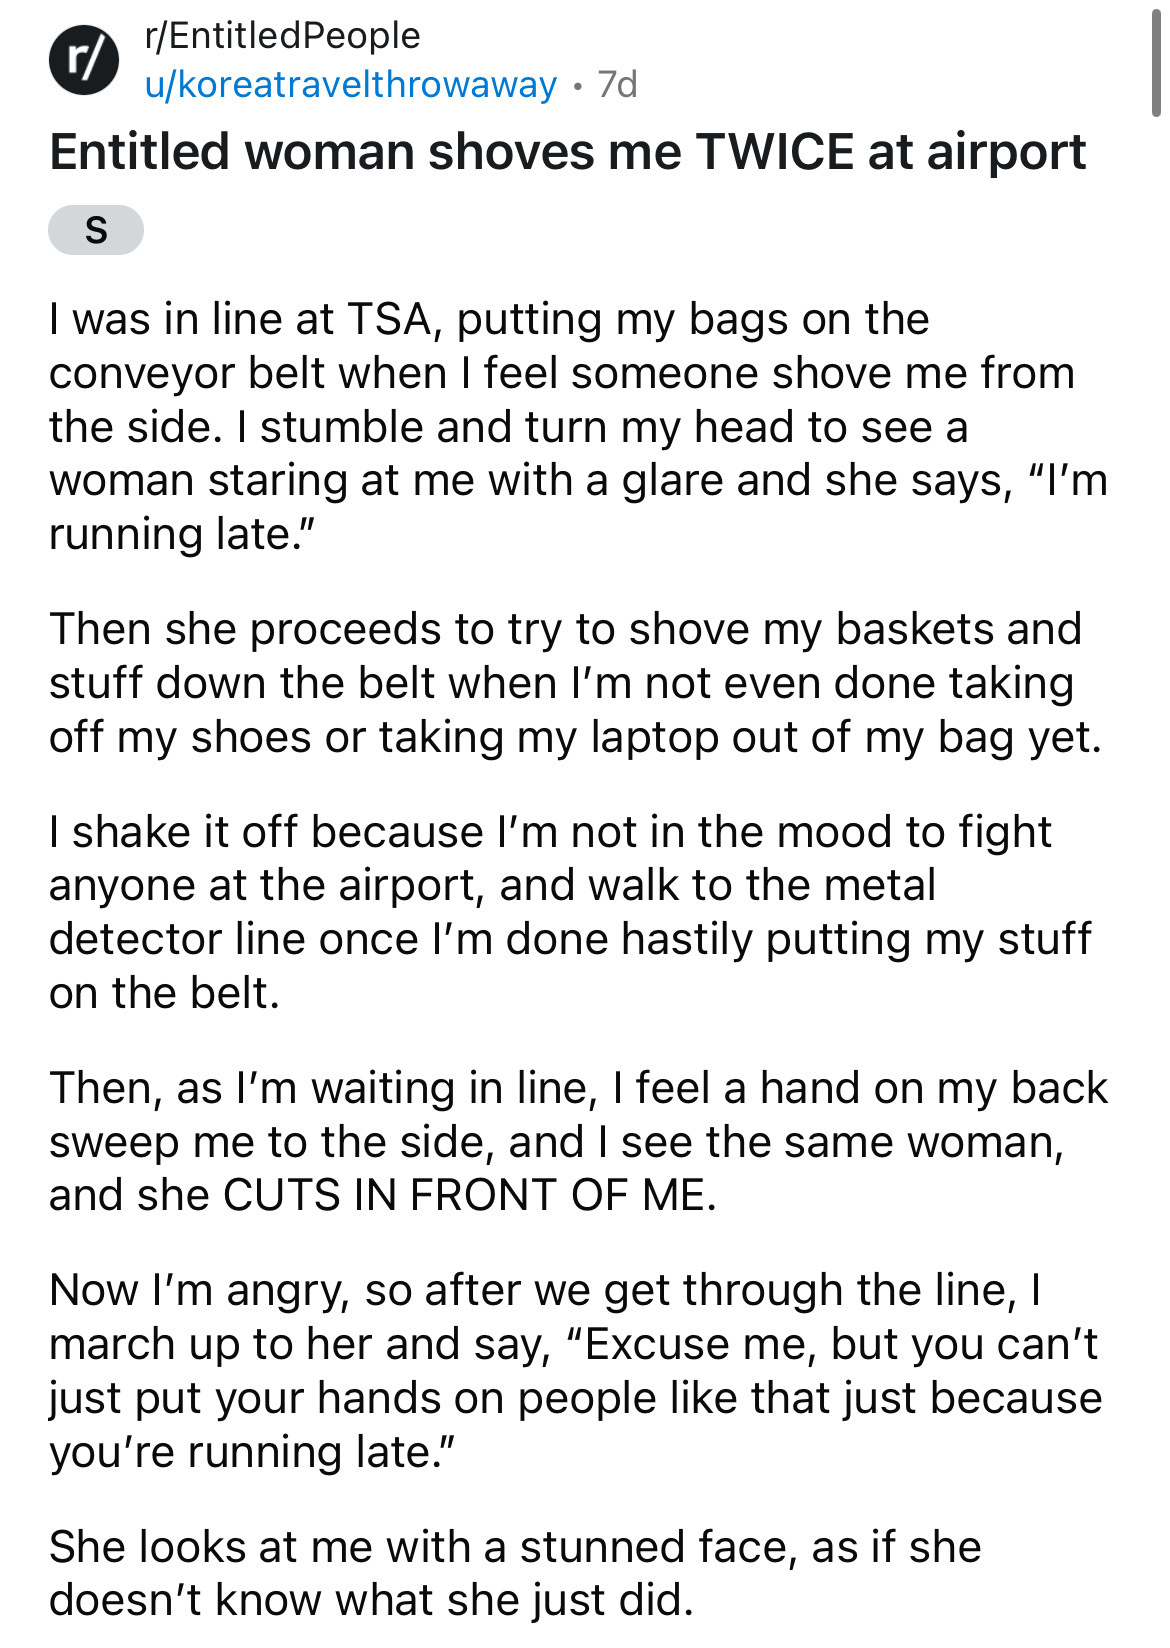 document - rEntitled People r ukoreatravelthrowaway 7d Entitled woman shoves me Twice at airport S I was in line at Tsa, putting my bags on the conveyor belt when I feel someone shove me from the side. I stumble and turn my head to see a woman staring at 